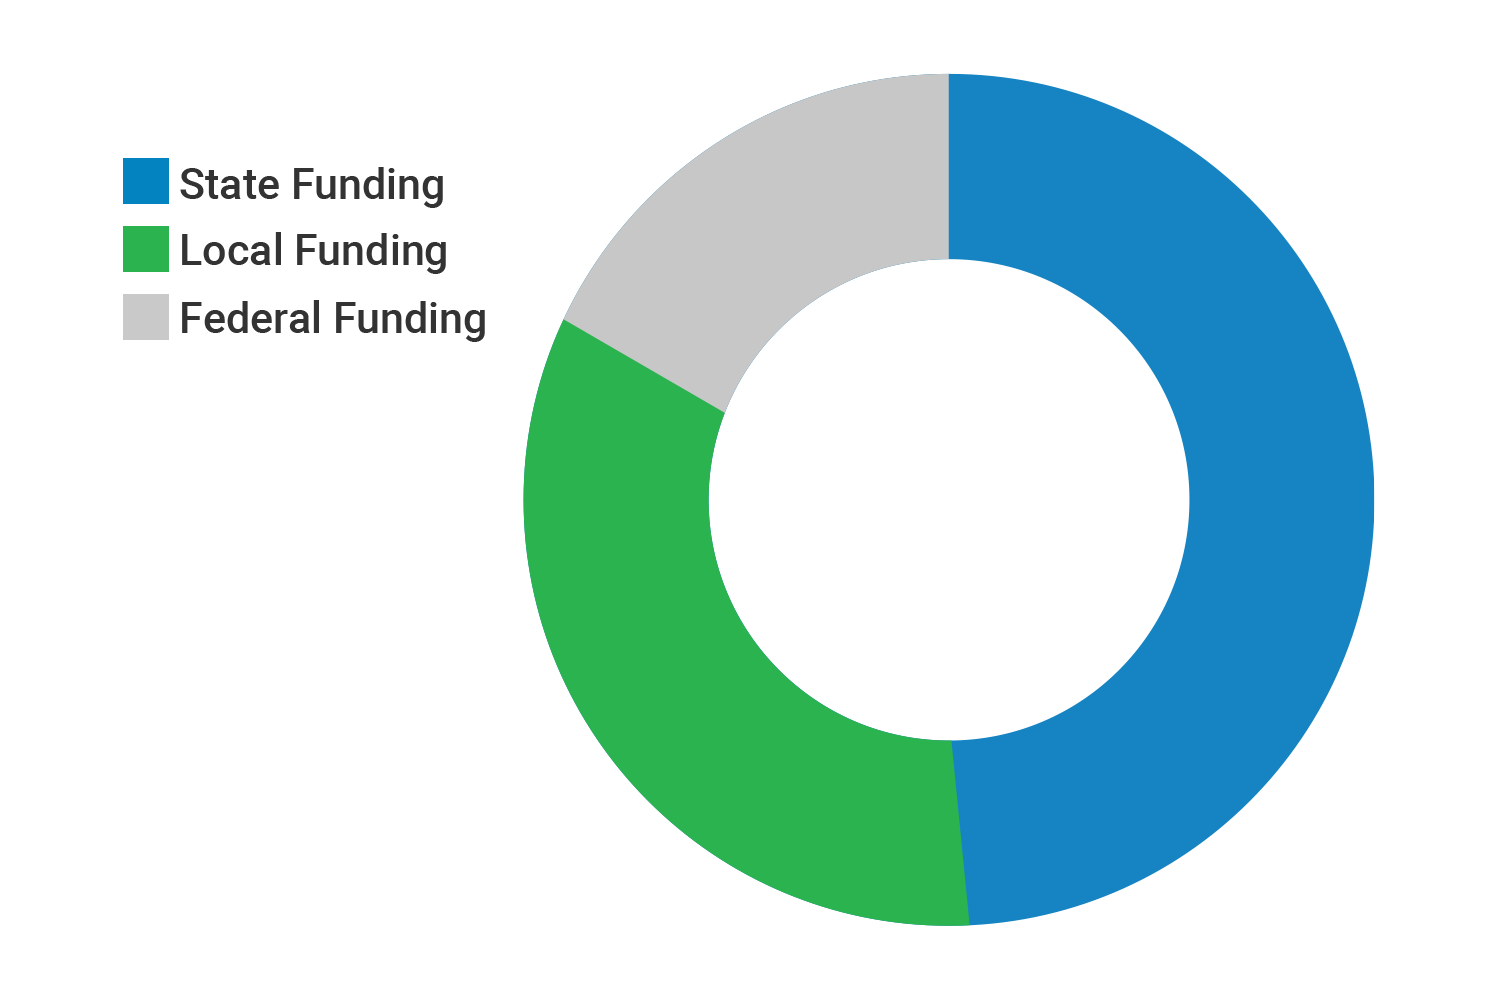 Graph representing state funding of 49 percent, local funding of 35%, and federal government funding of 16%